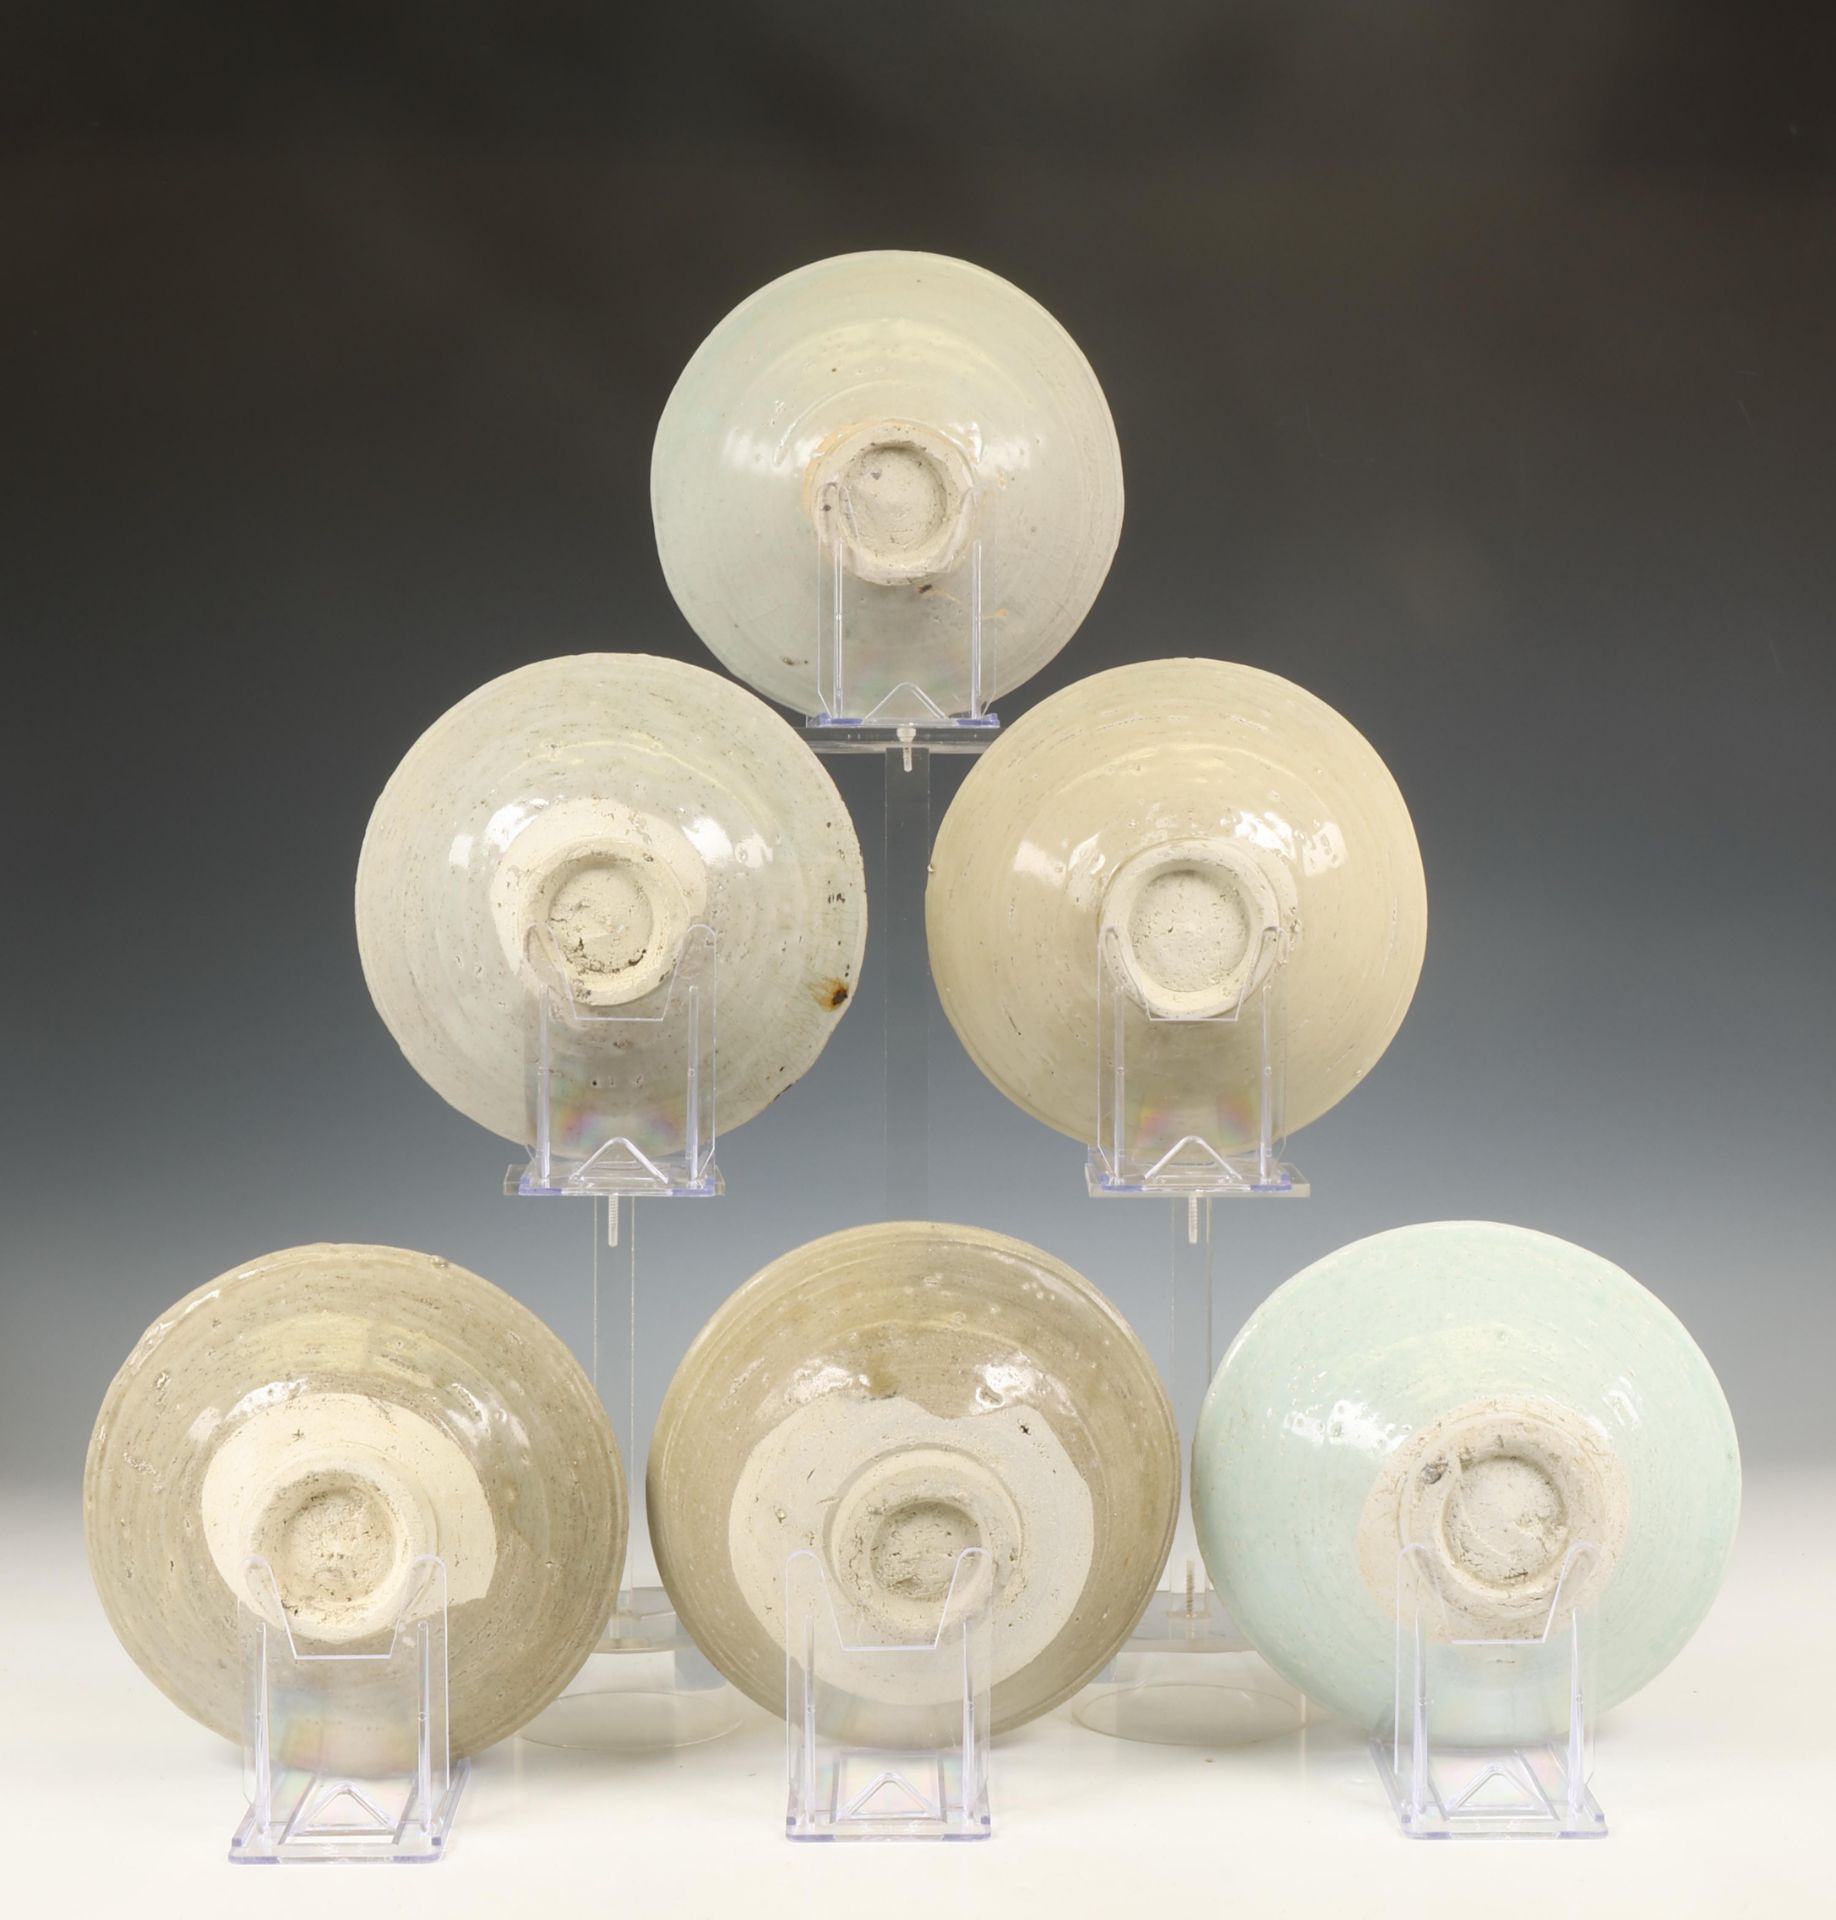 China, collection of eighteen celadon-glazed bowls, Northern Song dynasty, 10th-12th century, - Image 6 of 7